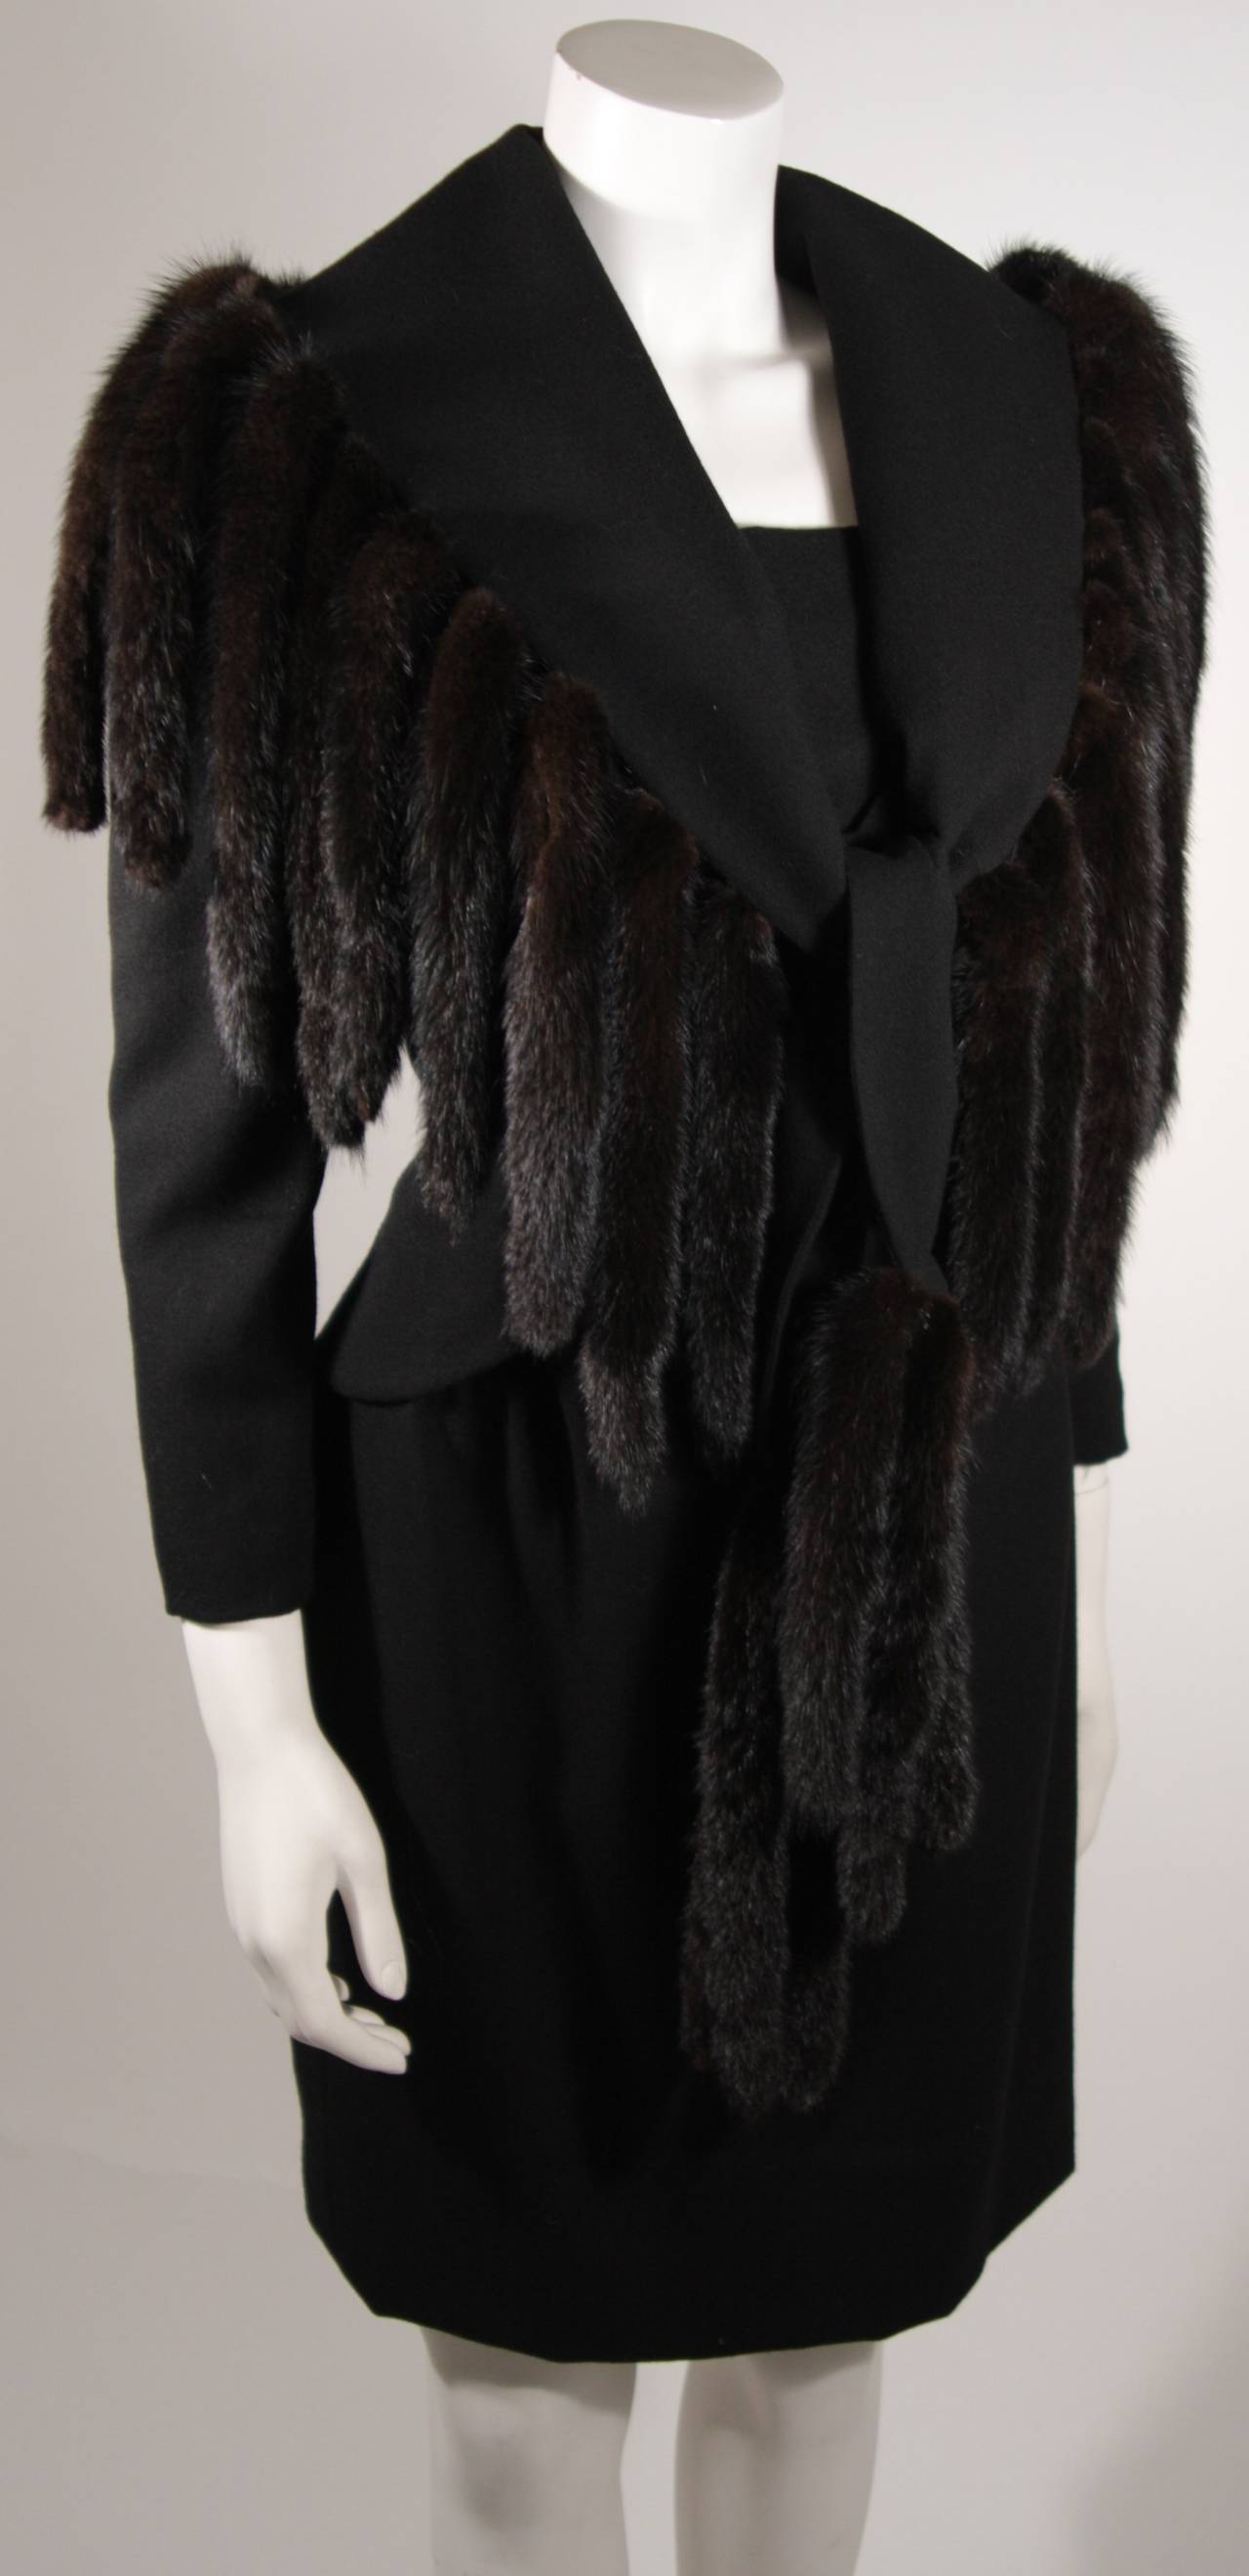 Travilla Black Wool Dress Ensemble with Mink Tail Fringed Coat Size 6-8 In Excellent Condition For Sale In Los Angeles, CA